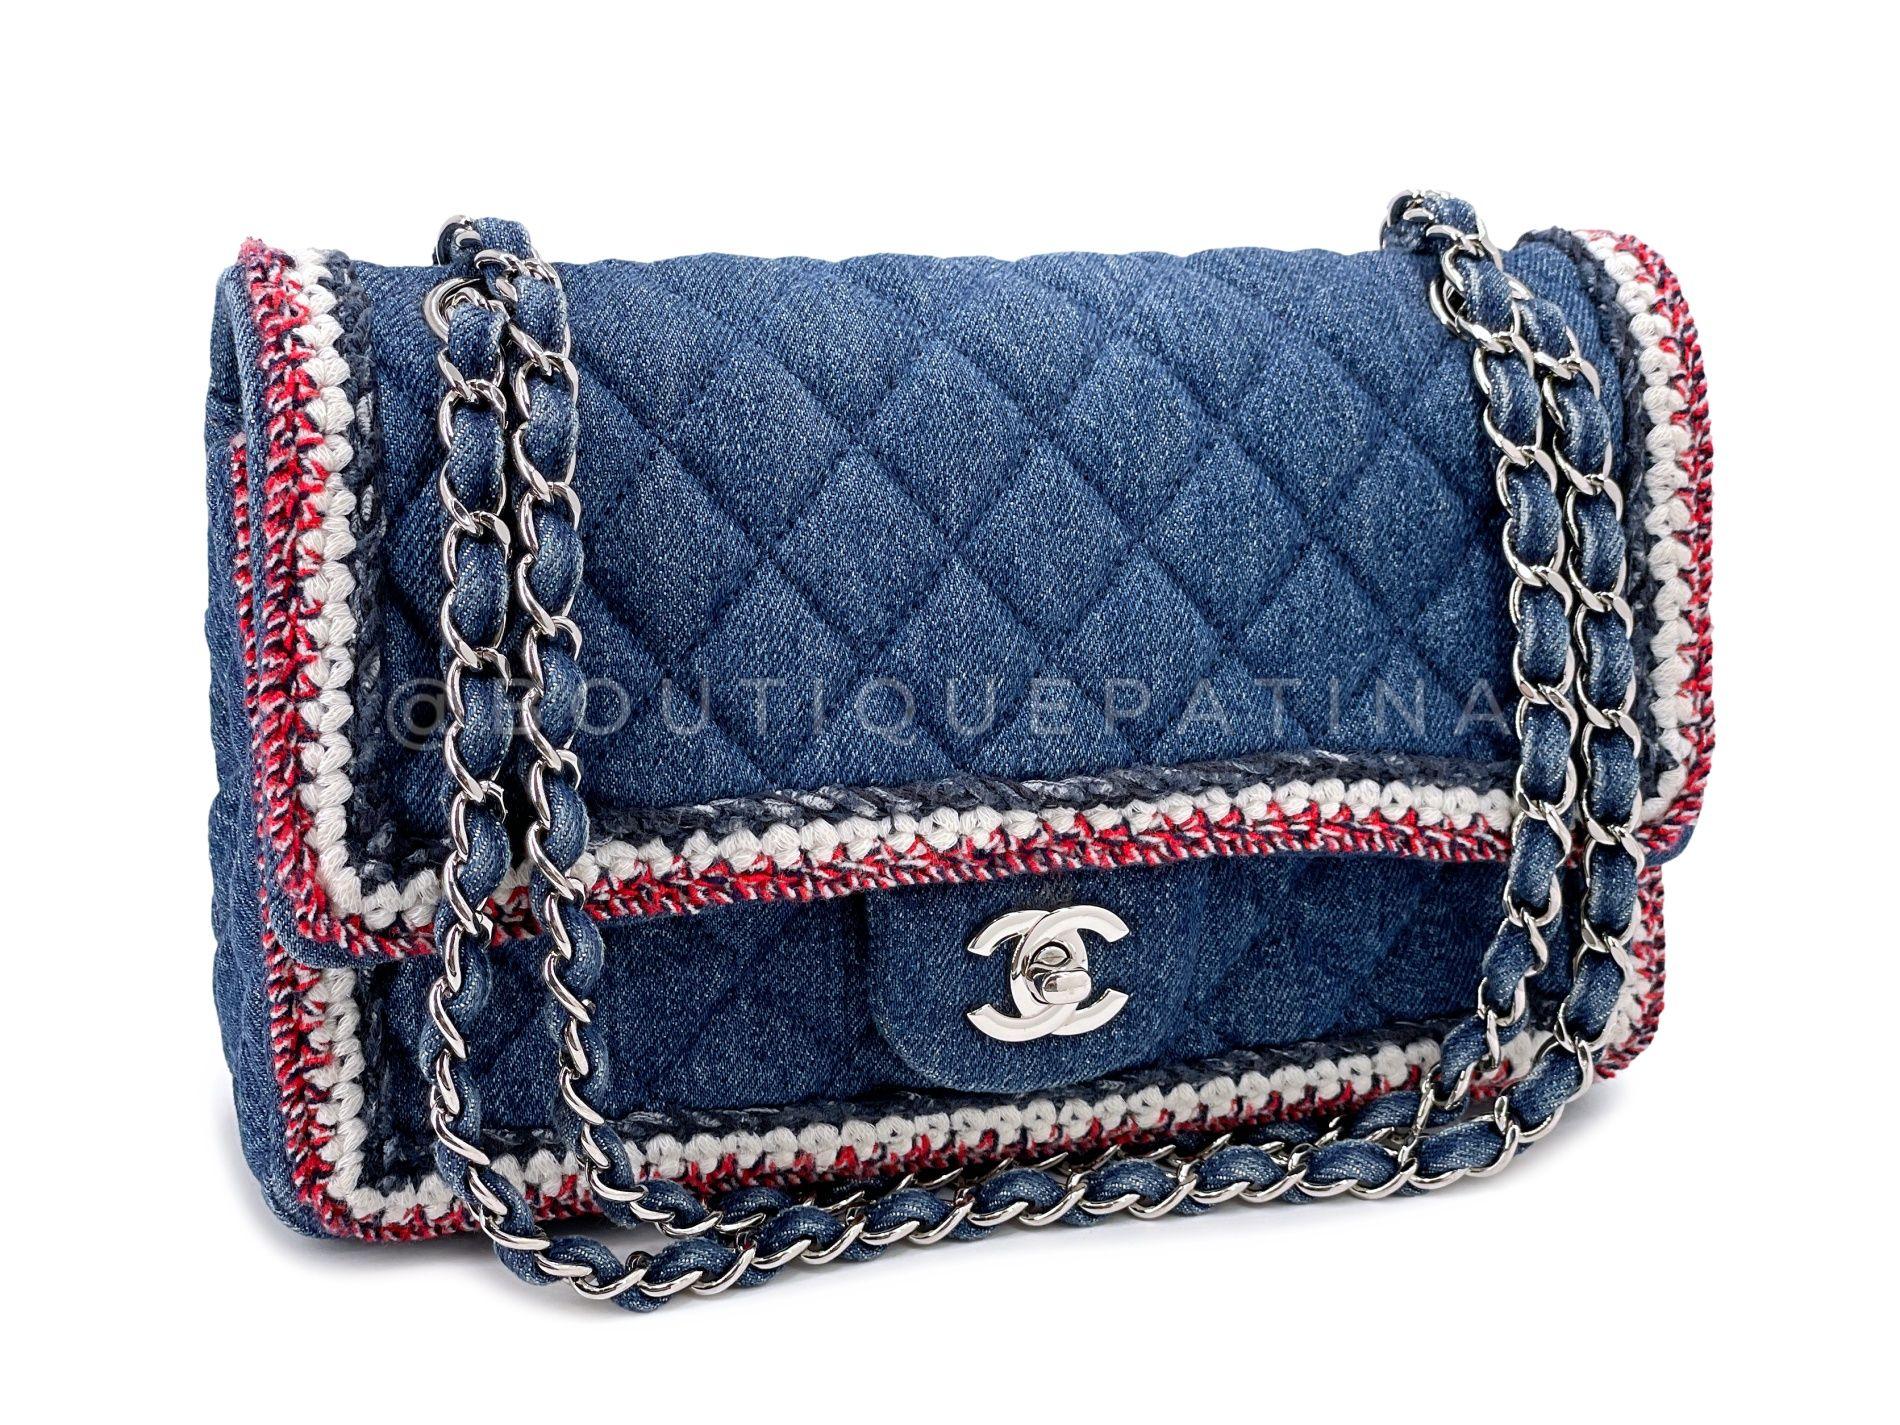 Store item: 67966
Chanel 2018 Framed Denim Medium Classic Flap Bag SHW is a whimsical yet chic Chanel classic with a tweed frame trim, double woven chain strap and blue lambskin interior. 

Interestingly, this is not a double flap but a single flap